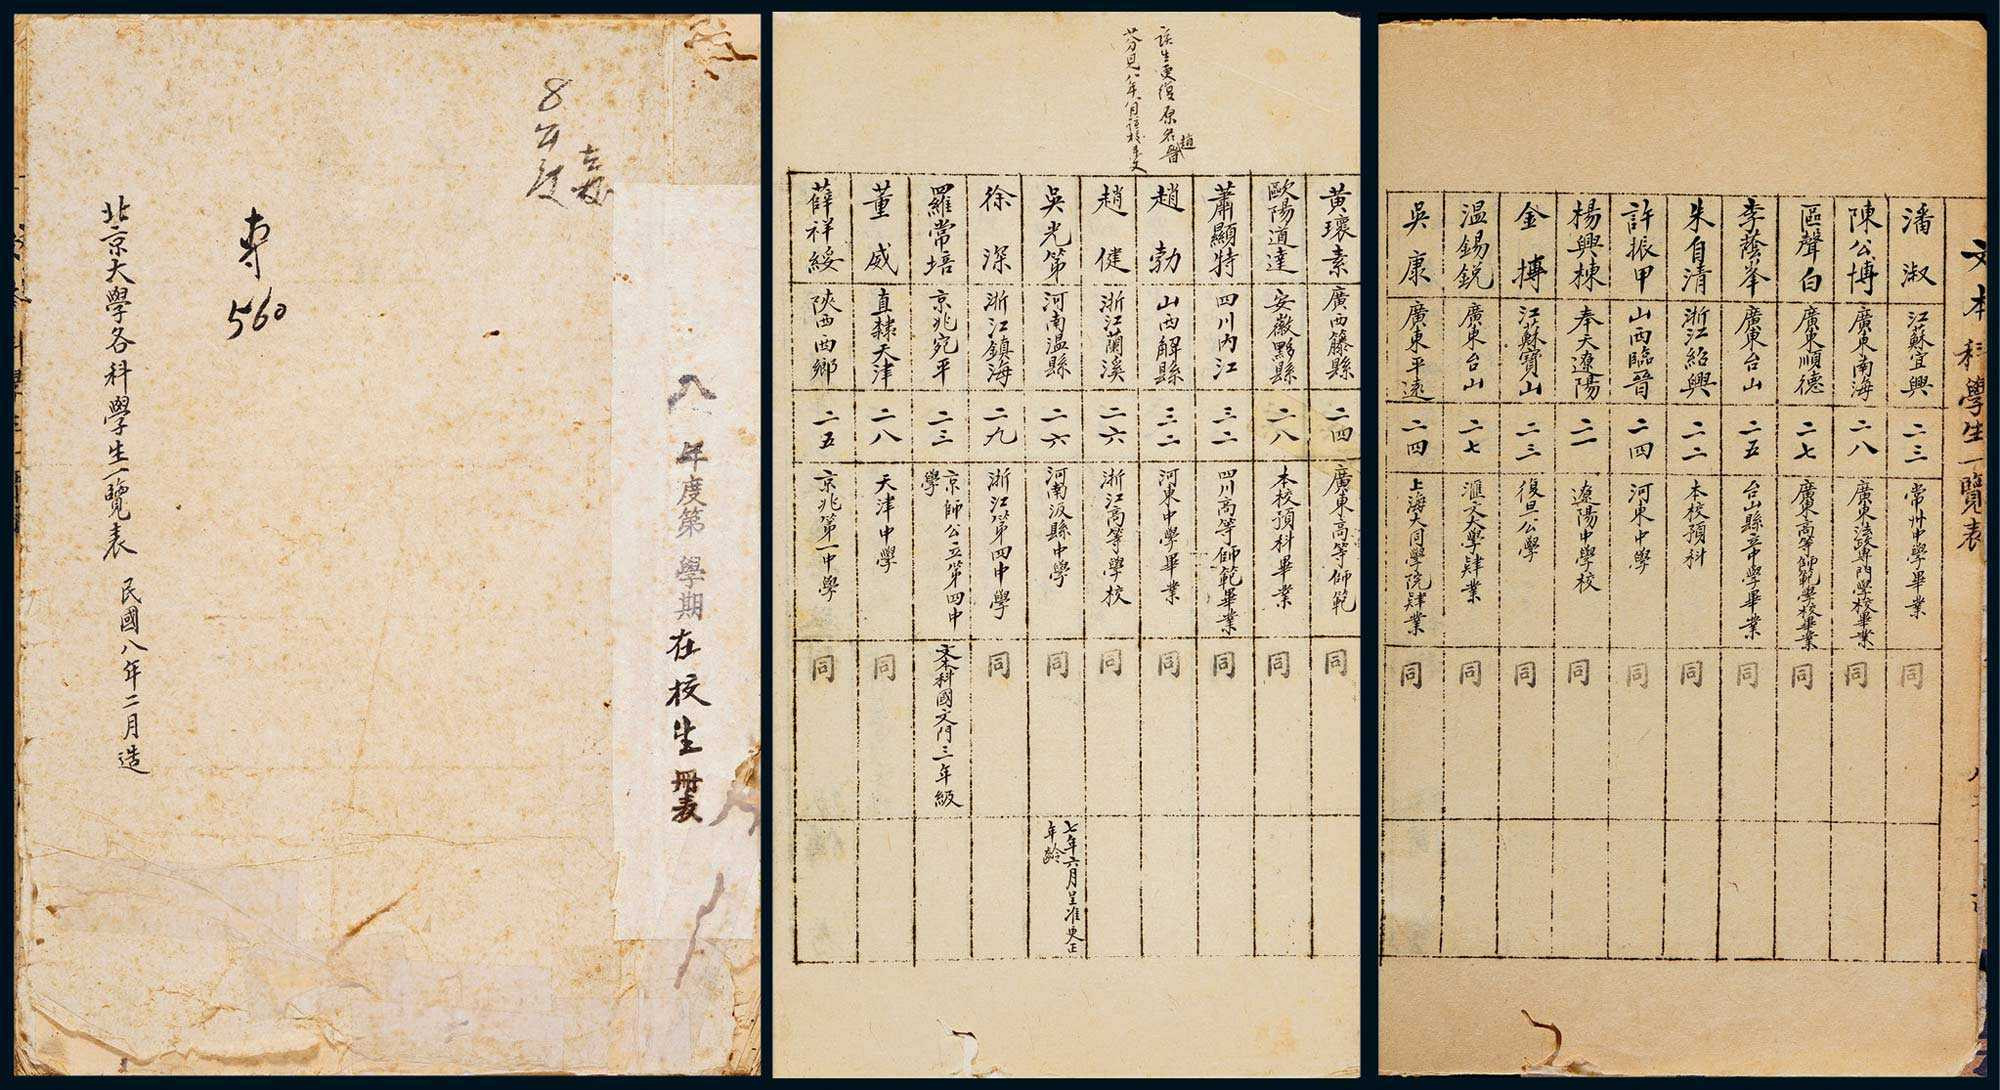 One volume "Peking University Student List in Various Disciplines" in the eighth year of the Republic of China (1919)